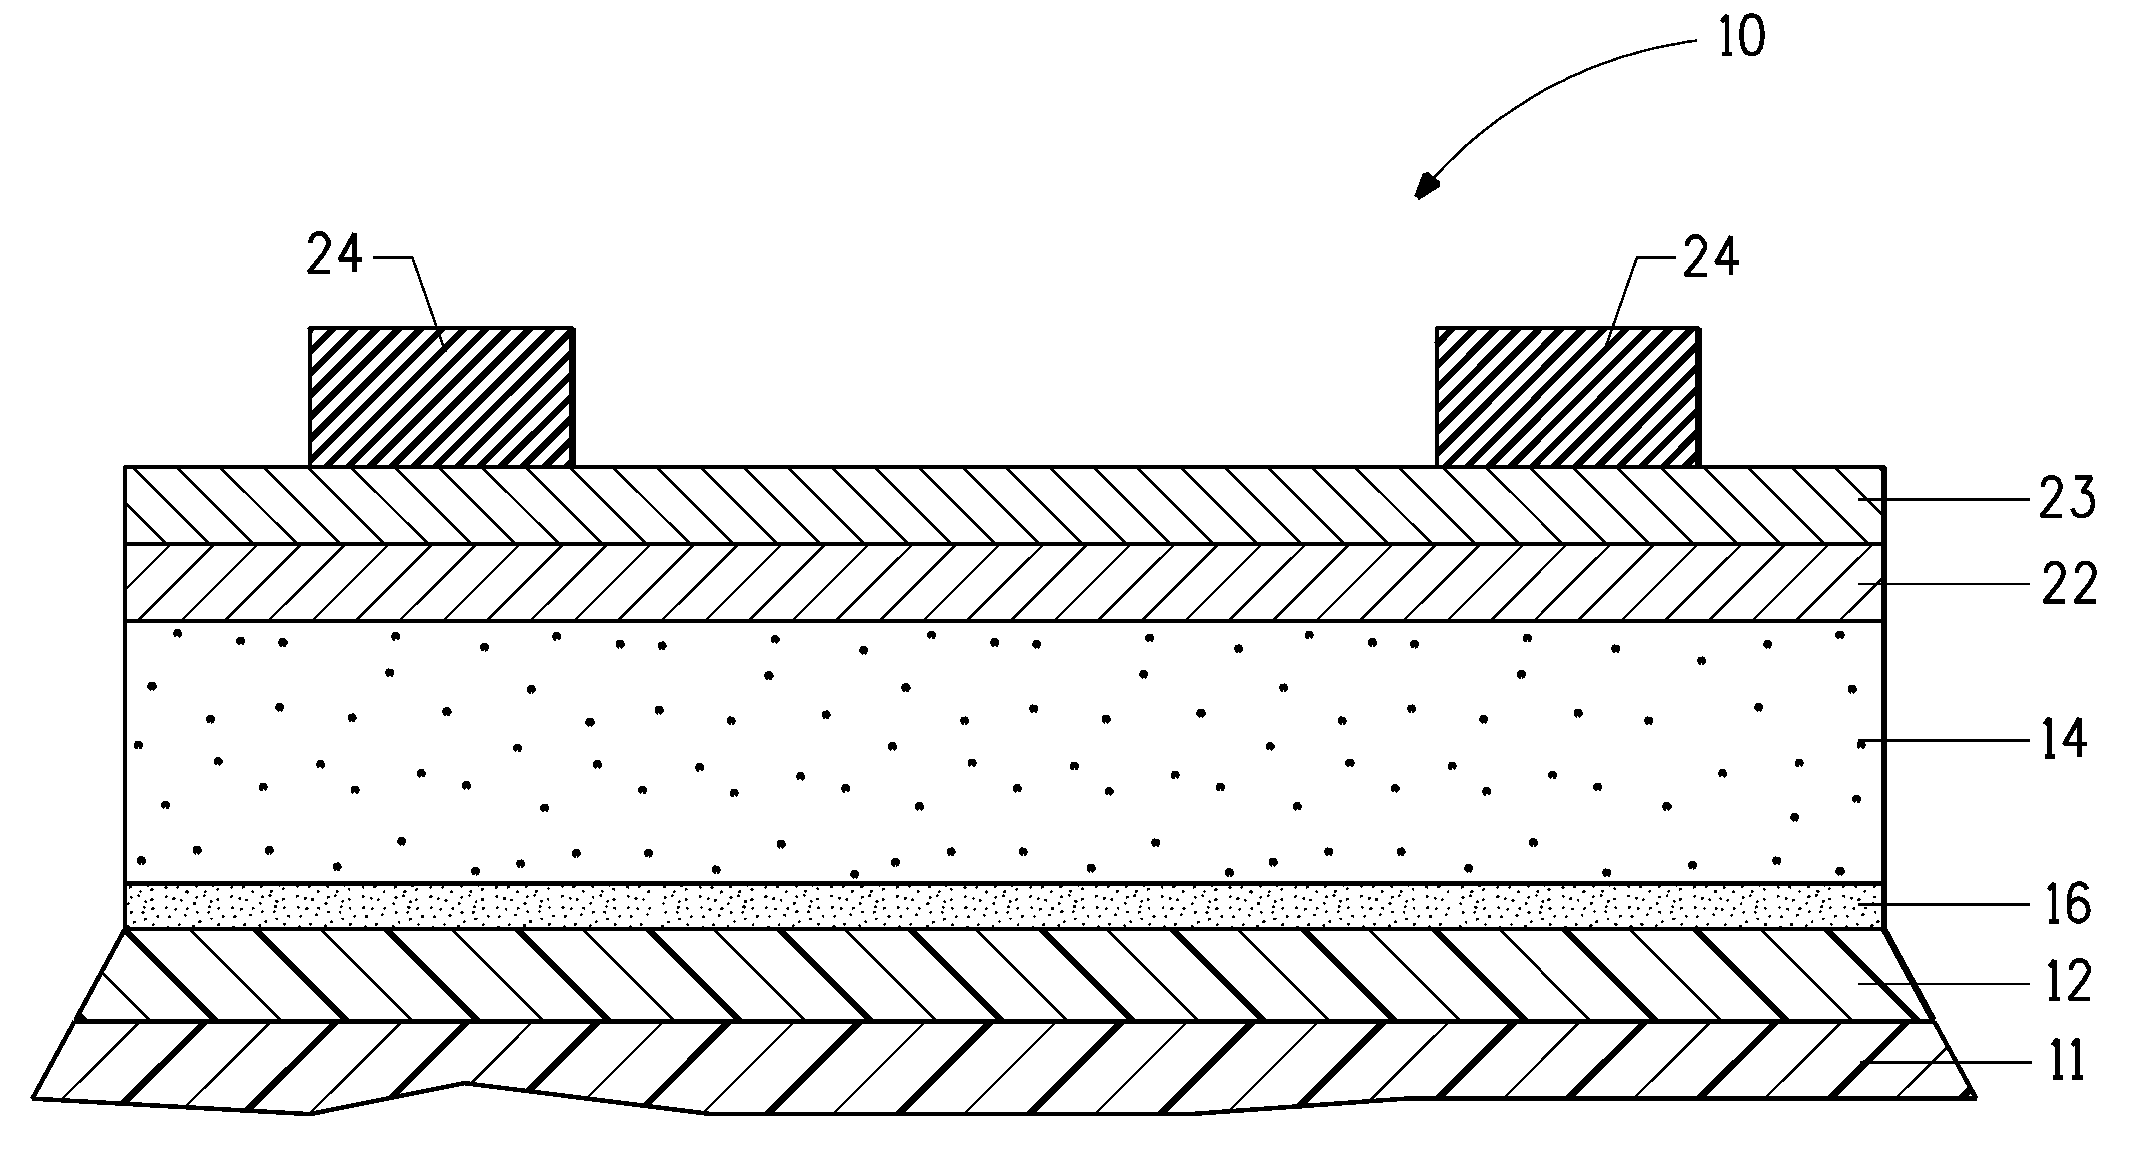 Laminate structures for high temperature photovoltaic applications, and methods relating thereto